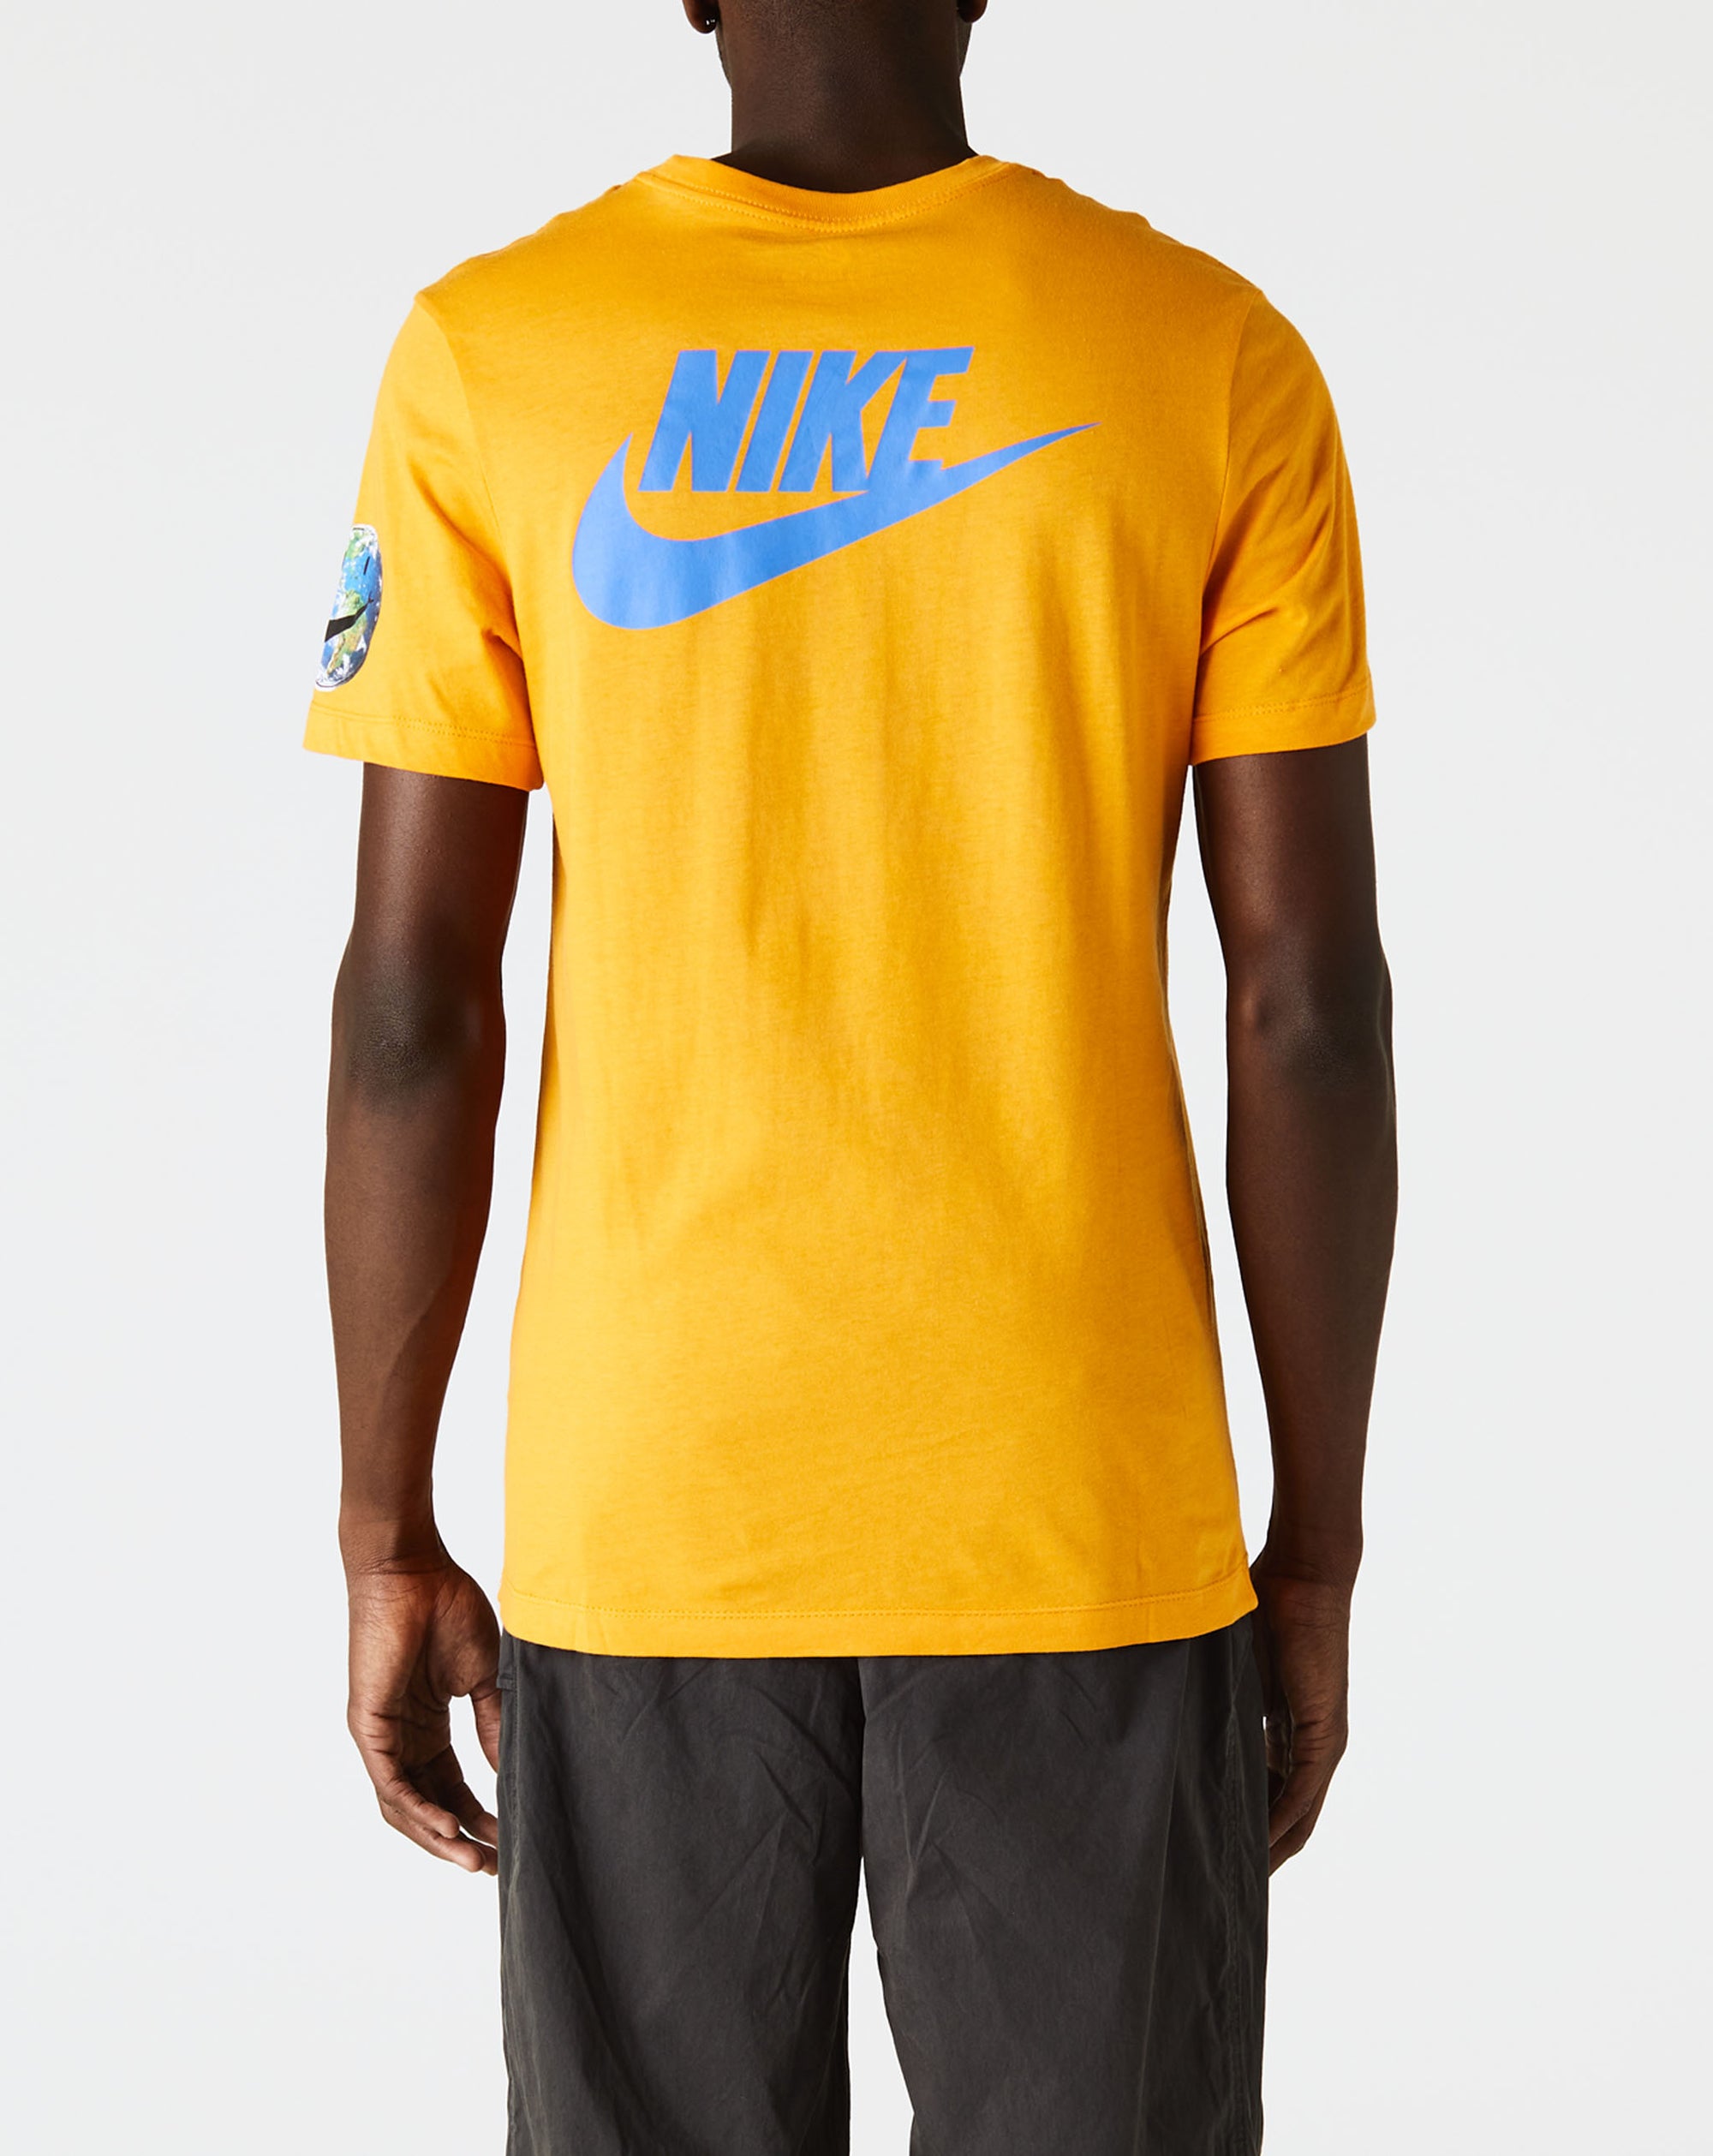 Nike Have A Nike Day T-Shirt - Rule of Next Apparel